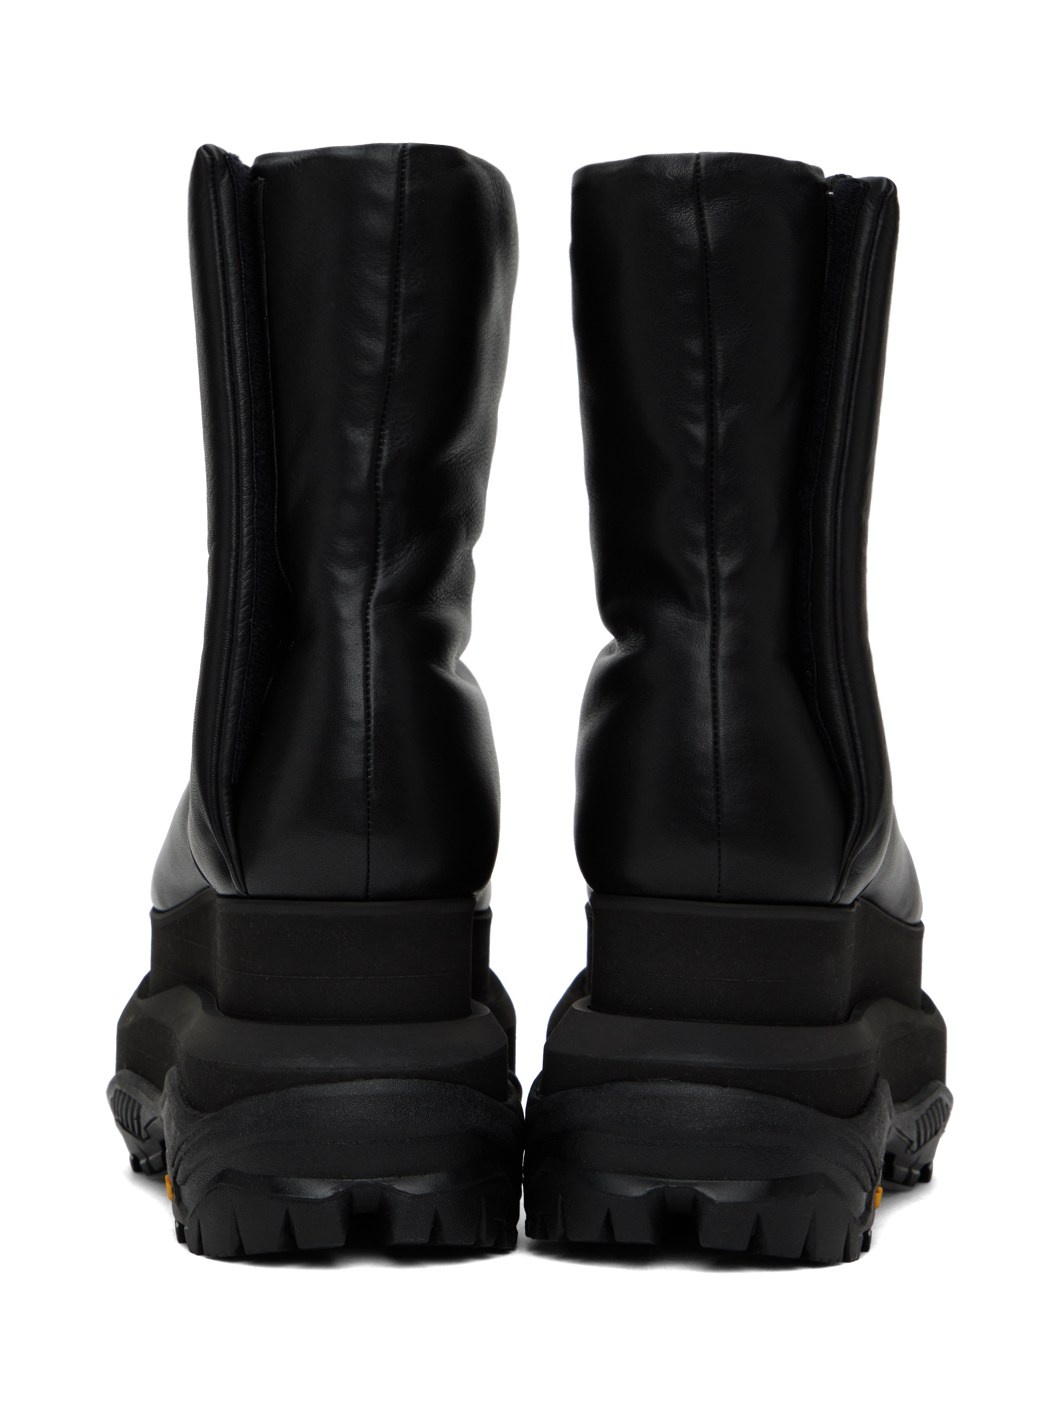 Black Padded Wedge Boots - 2